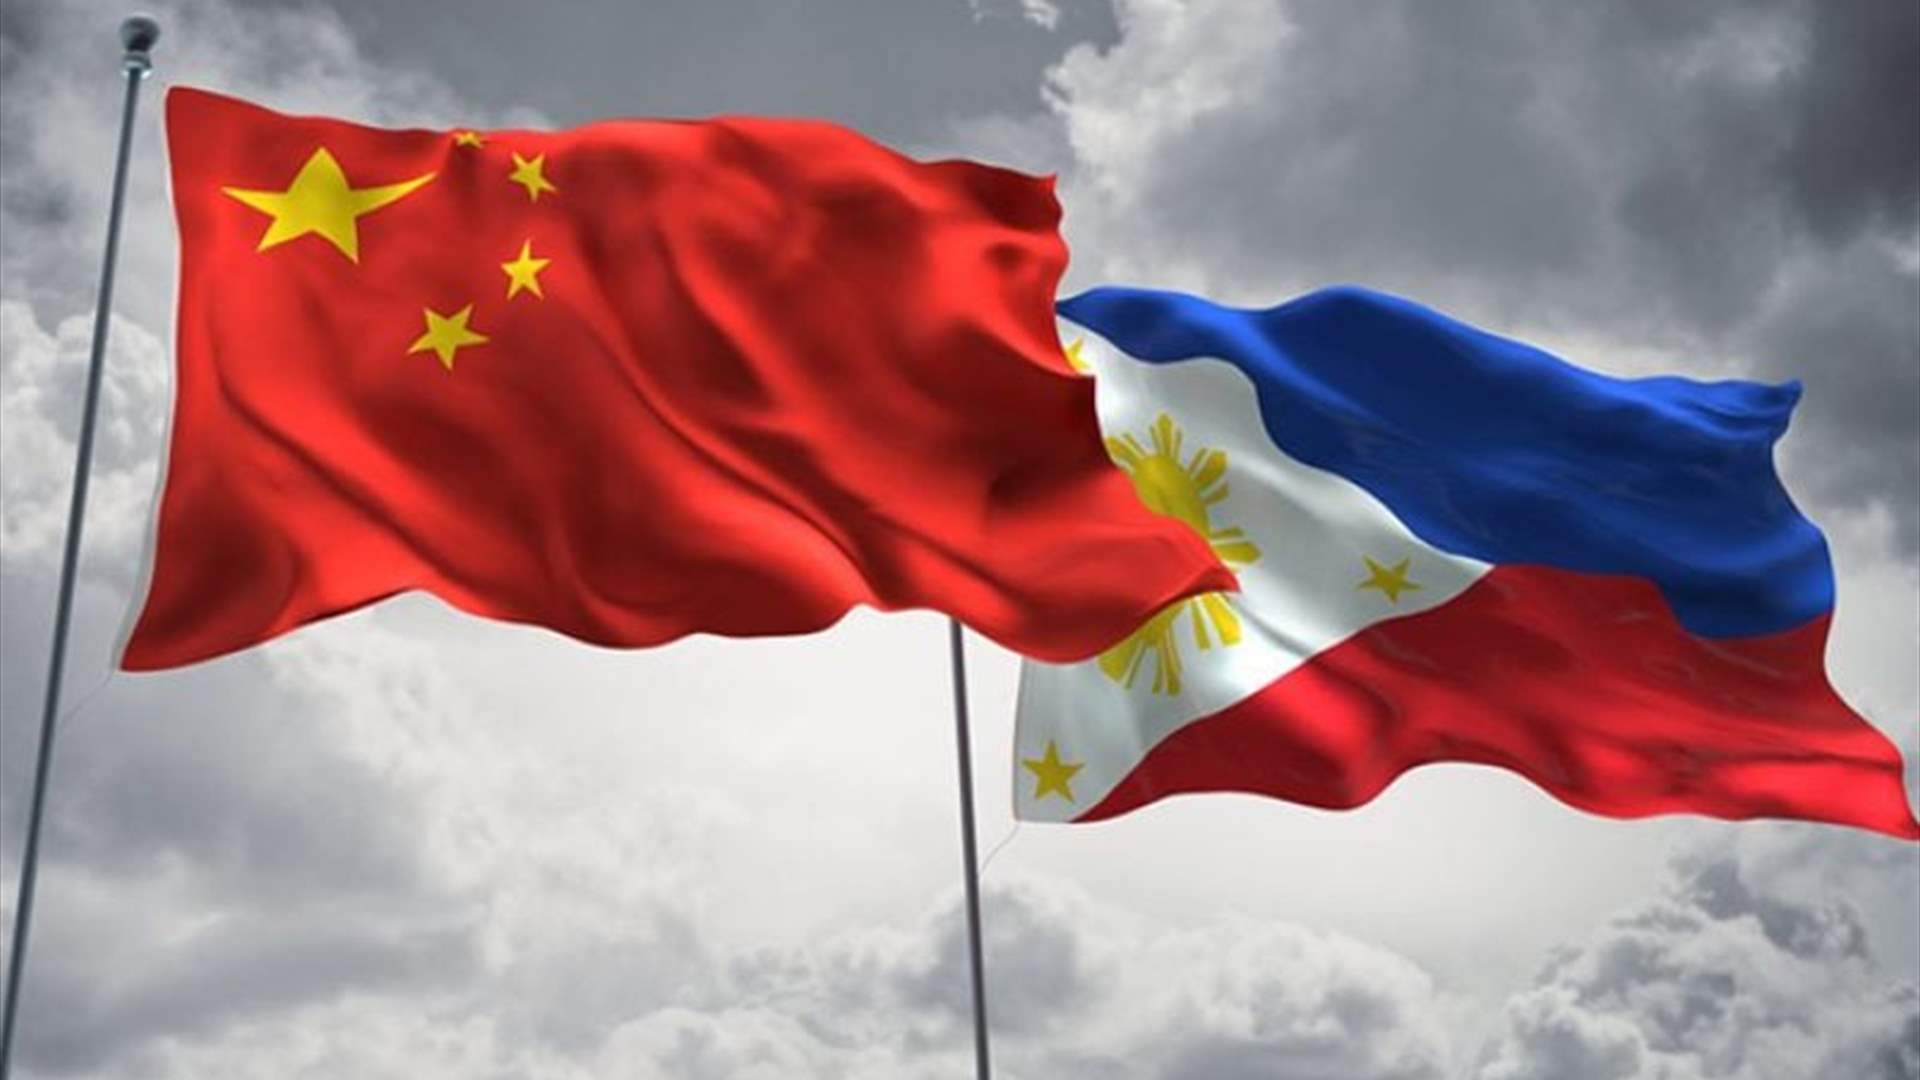 Philippines, China trade accusations over South China Sea collision